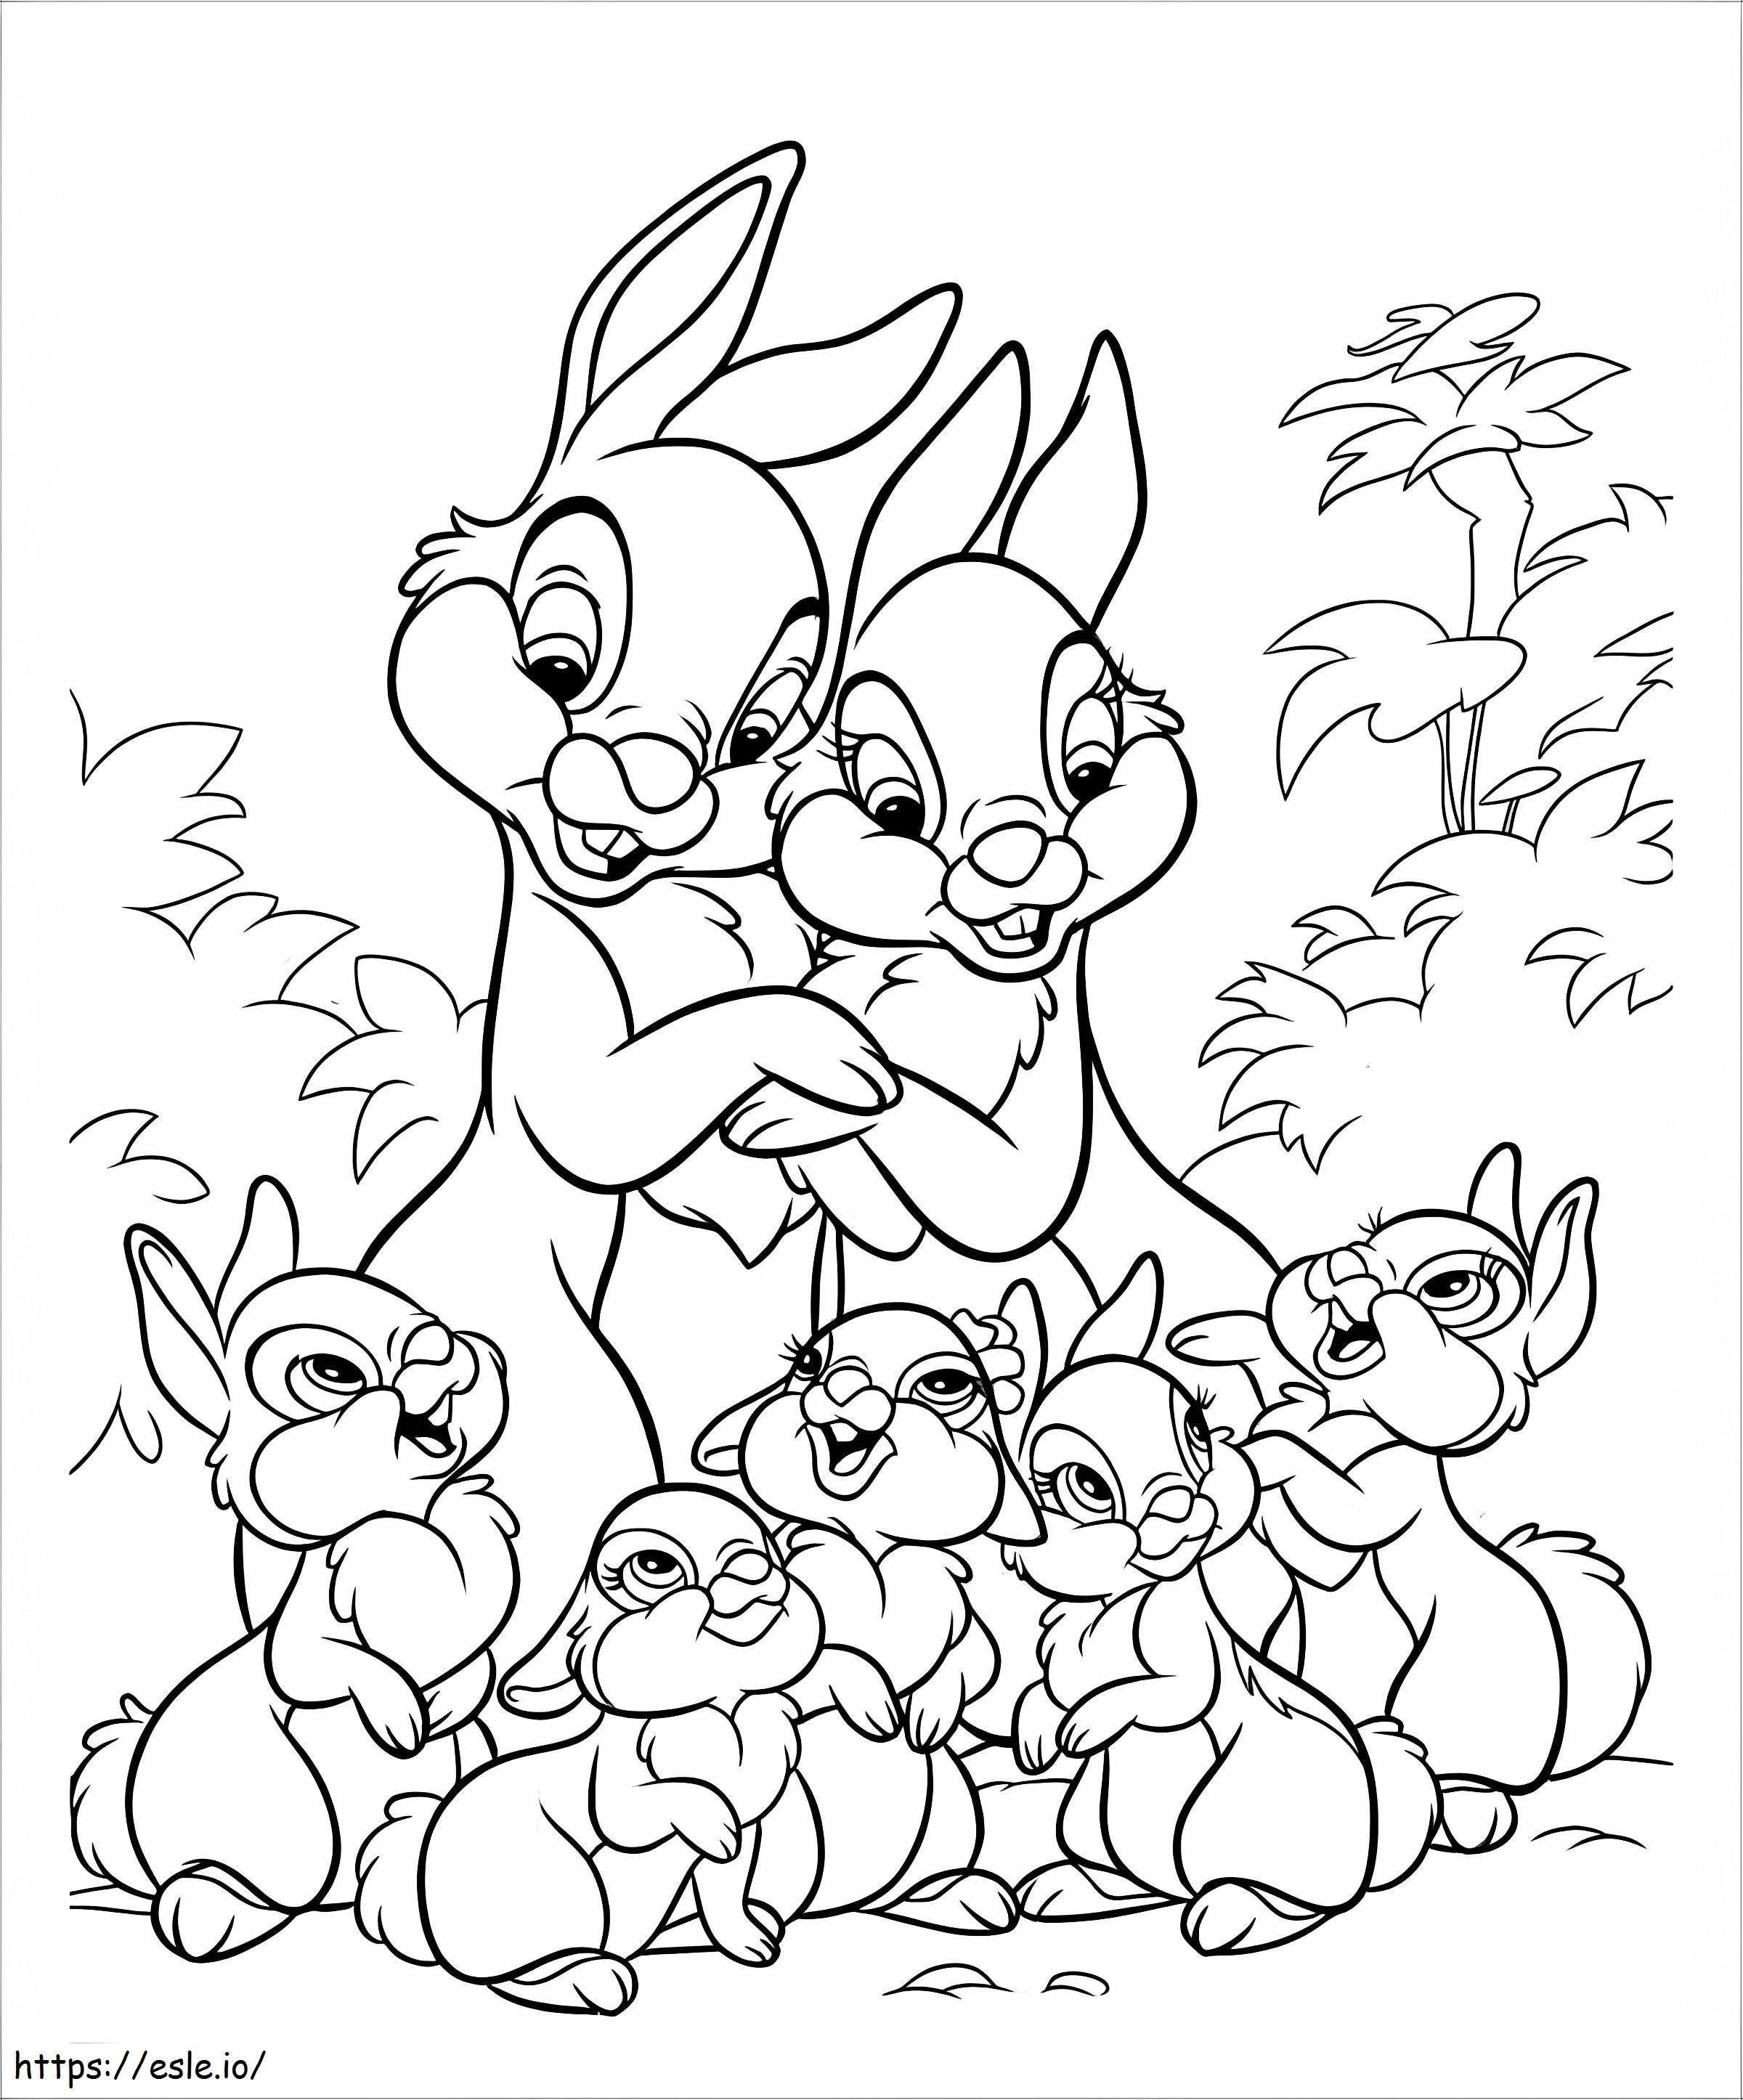 Bunny Family coloring page